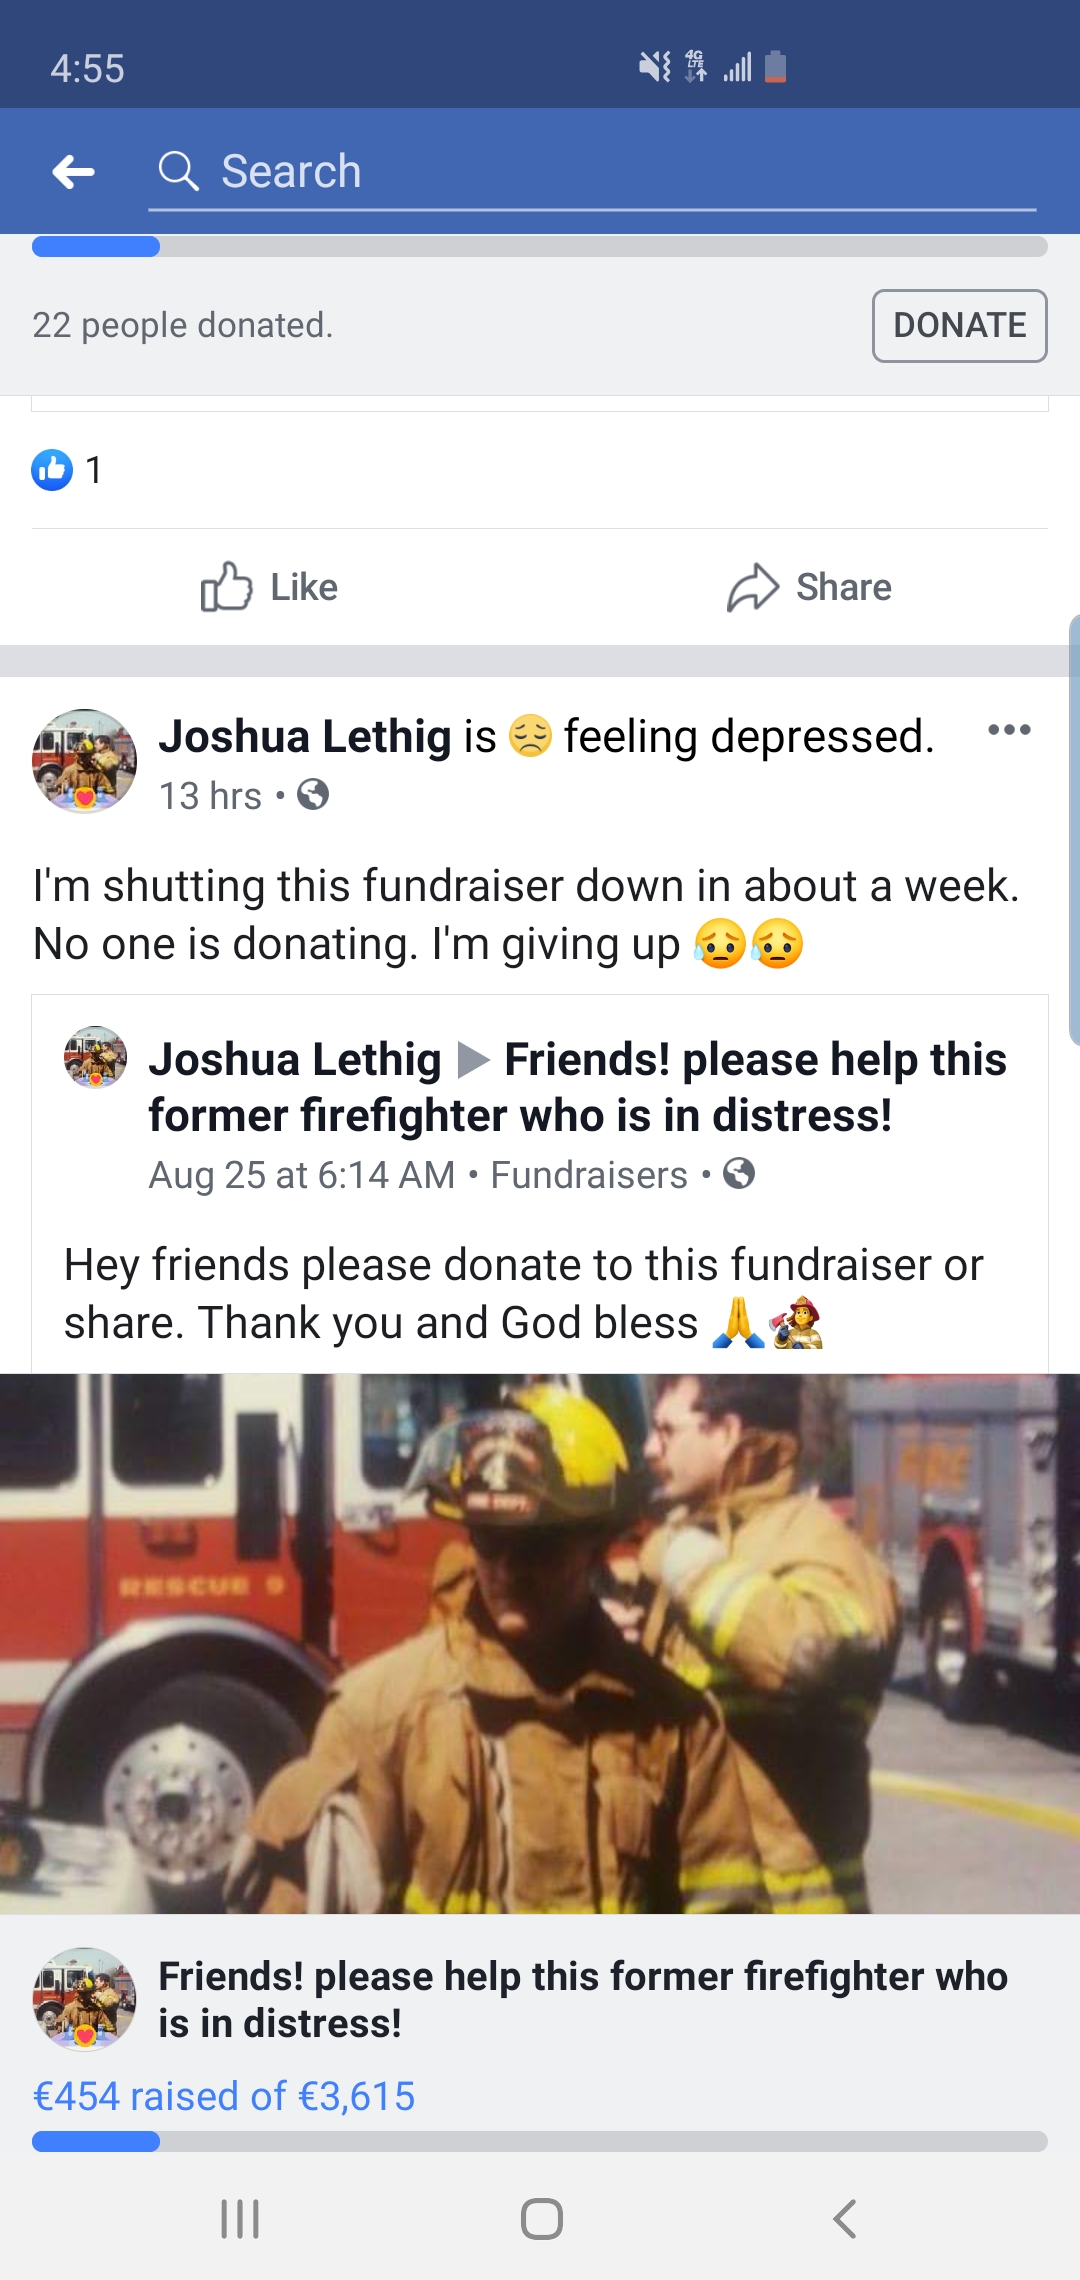 web page - 14 a Search 22 people donated Joshua Lethig is 13 hrs feeling depressed." I'm shutting this fundraiser down in about a week. No one is donating. I'm giving up 9 Joshua Lethig Friends! please help this former firefighter who is in distress! Aug 